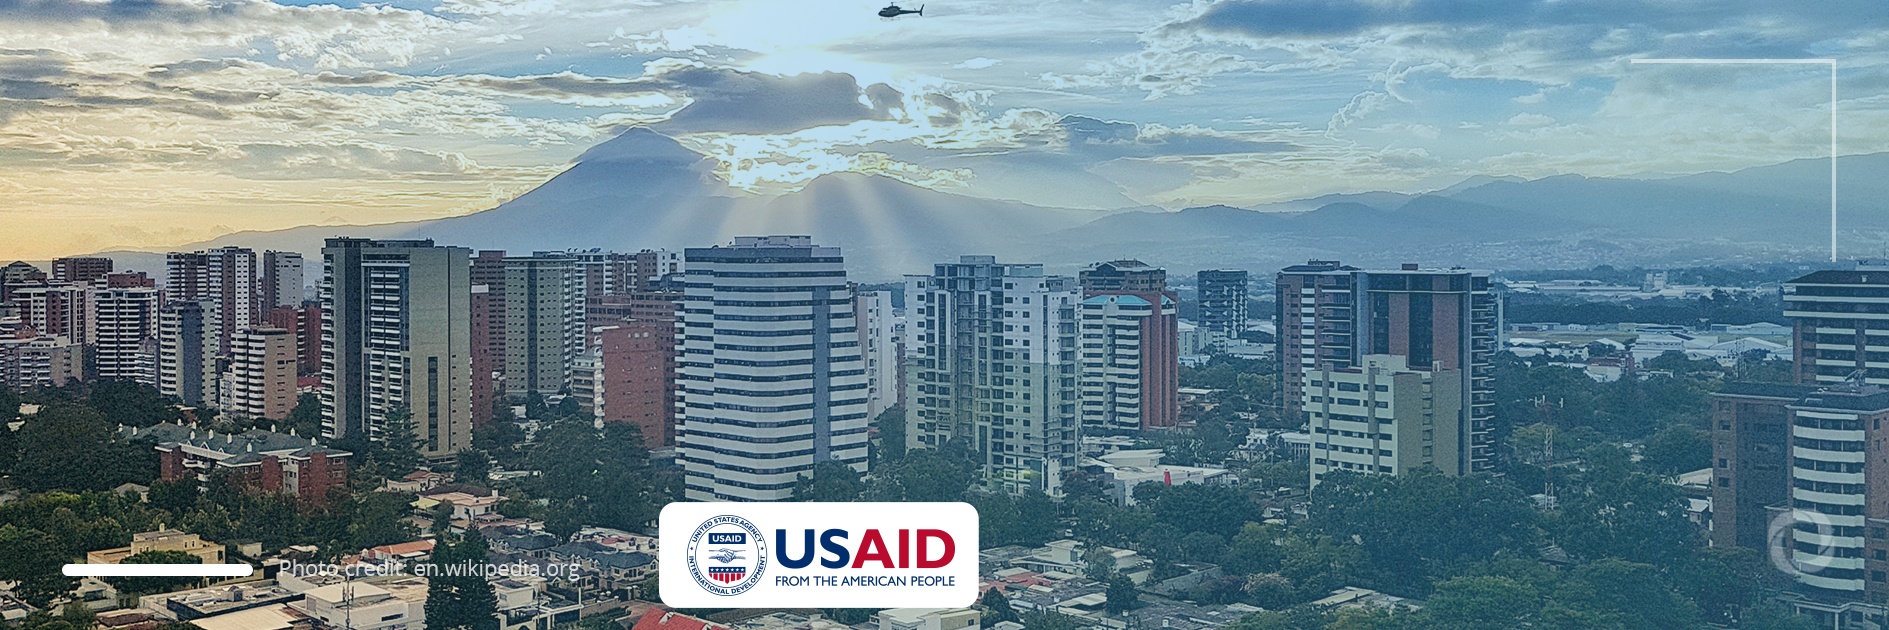 USAID to provide US$39 million in aid to Guatemala, US$115 million to El Salvador